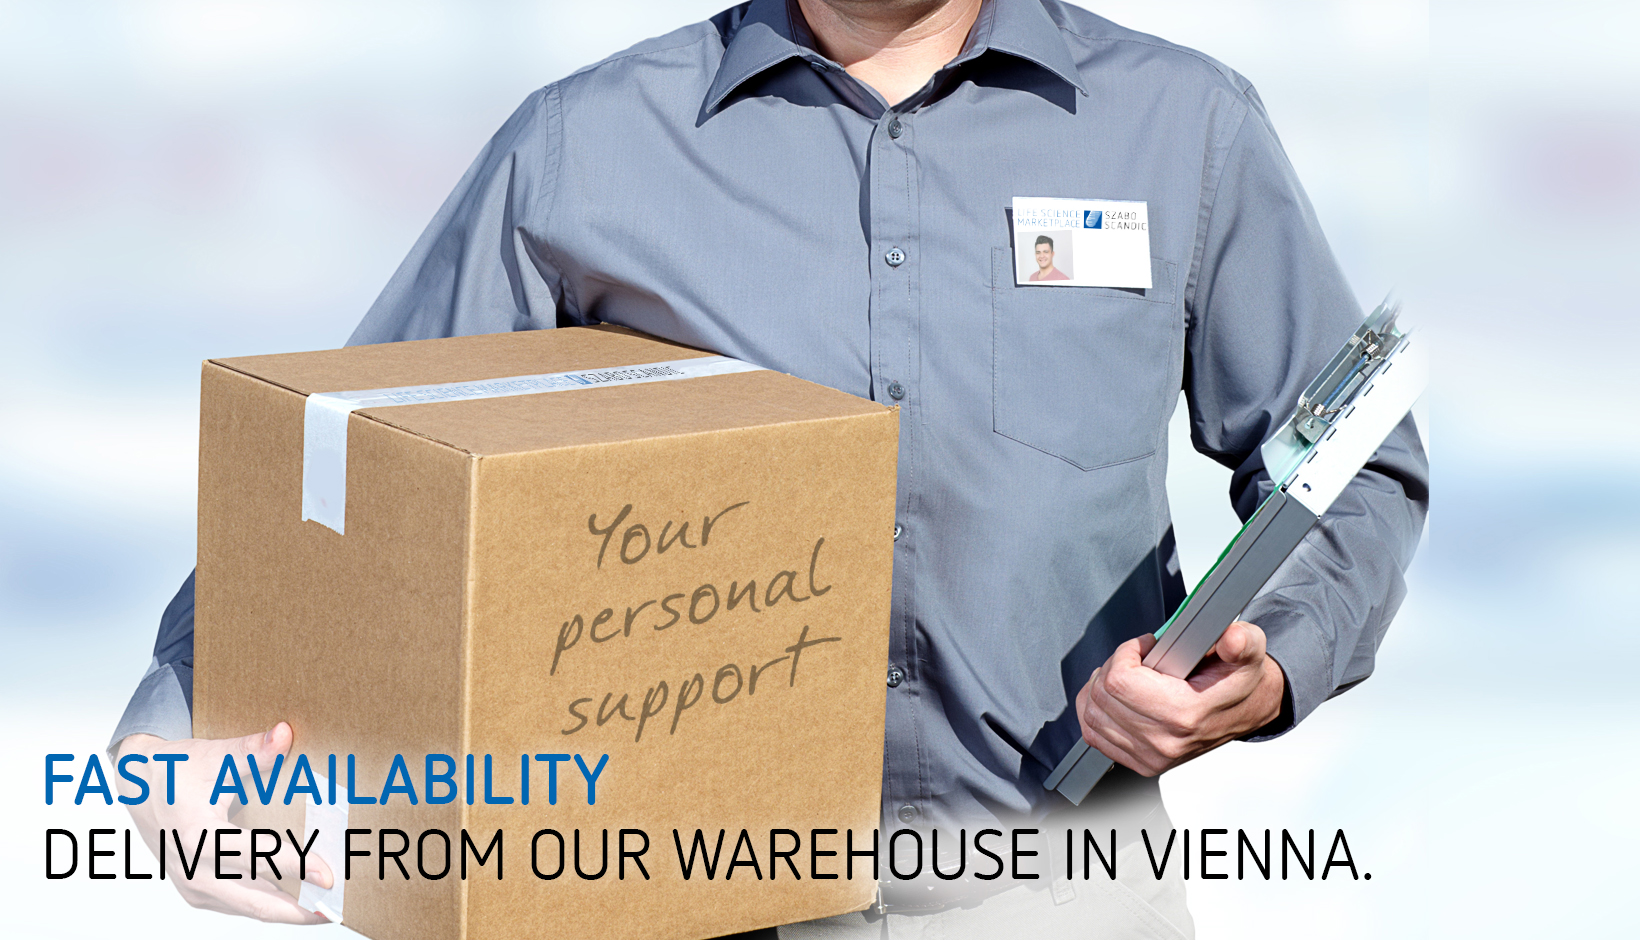 Fast availability - delivery from our warehouse in Vienna